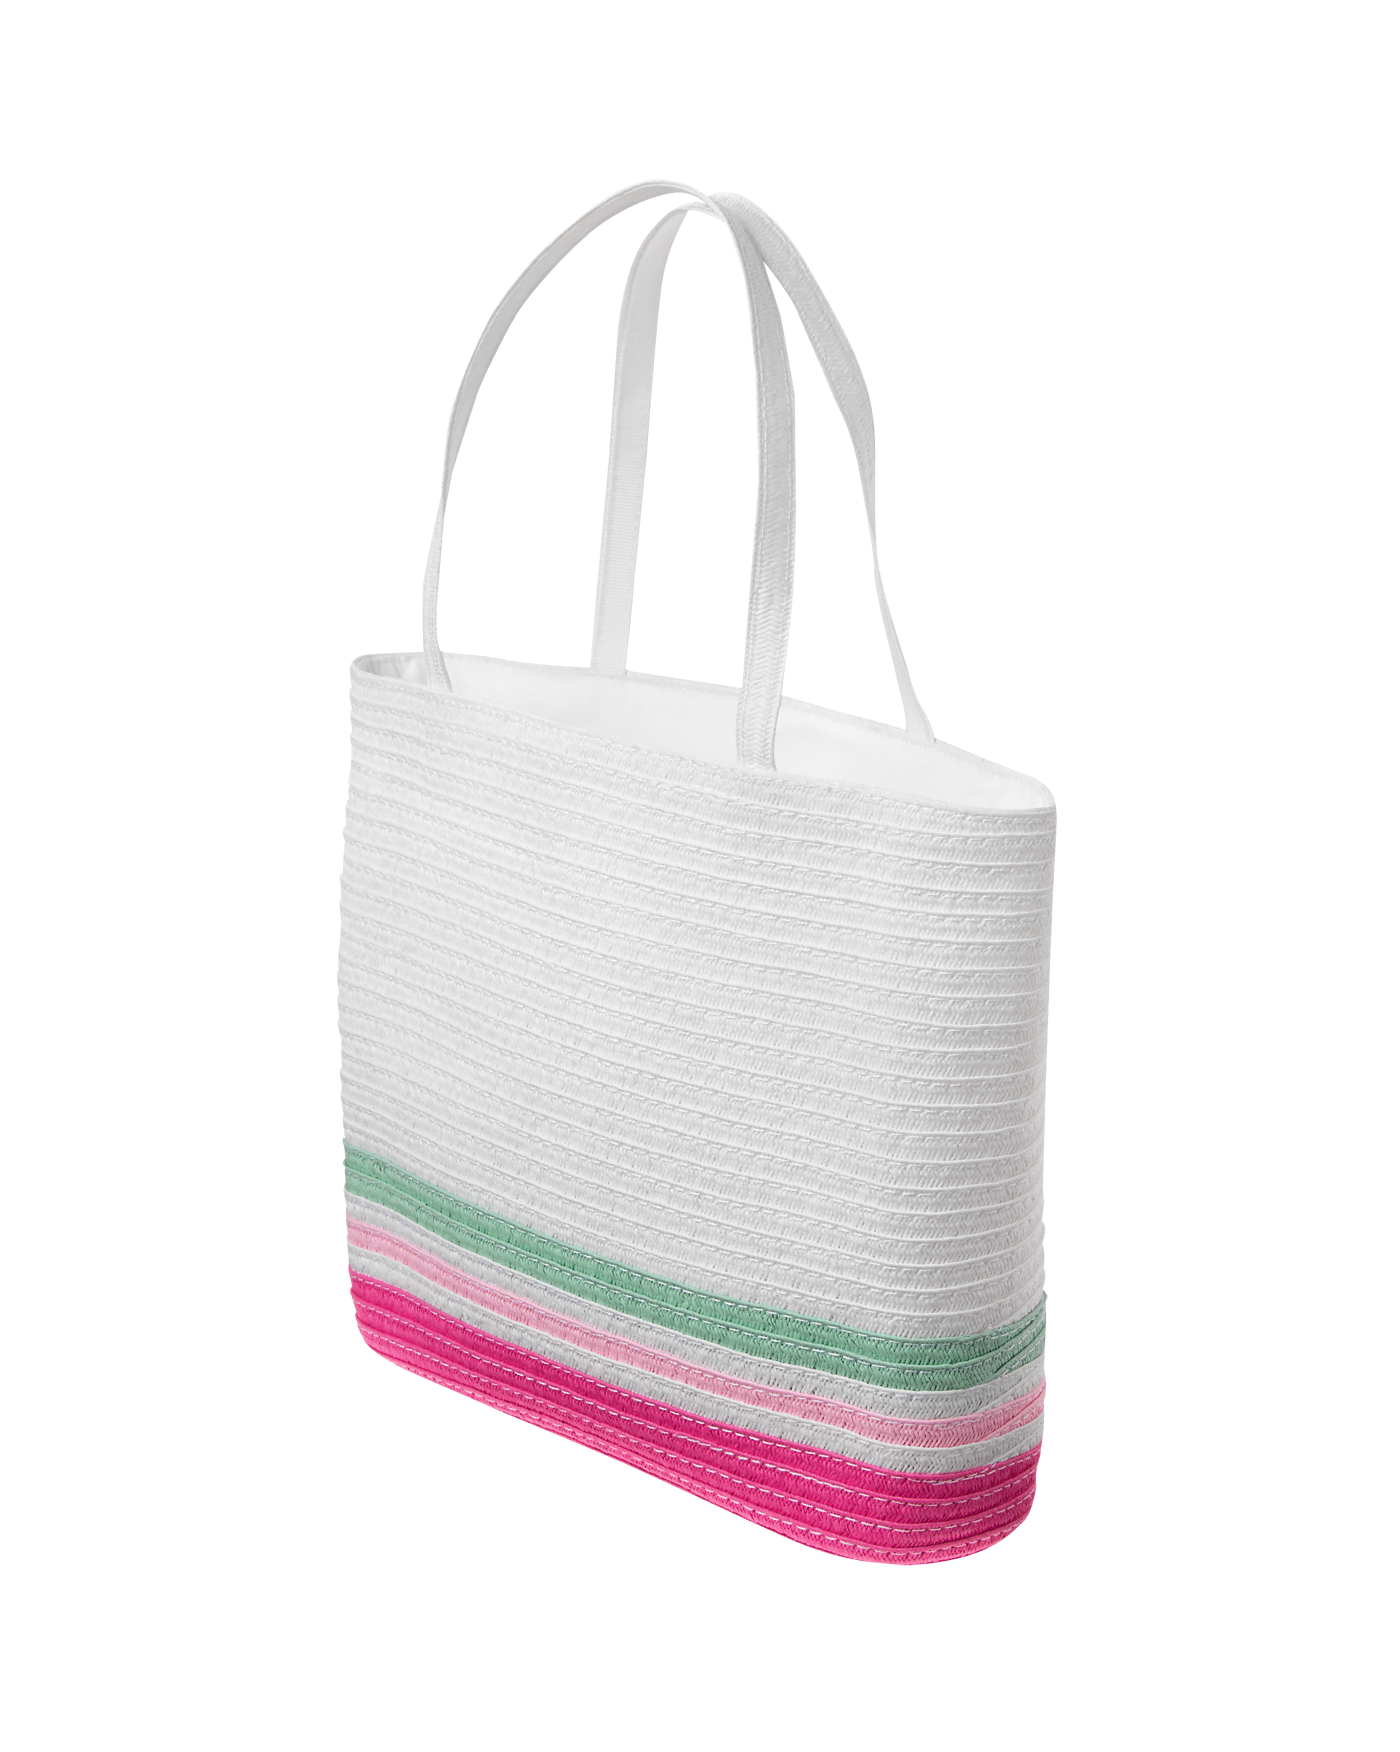 Striped Straw Tote image number 0